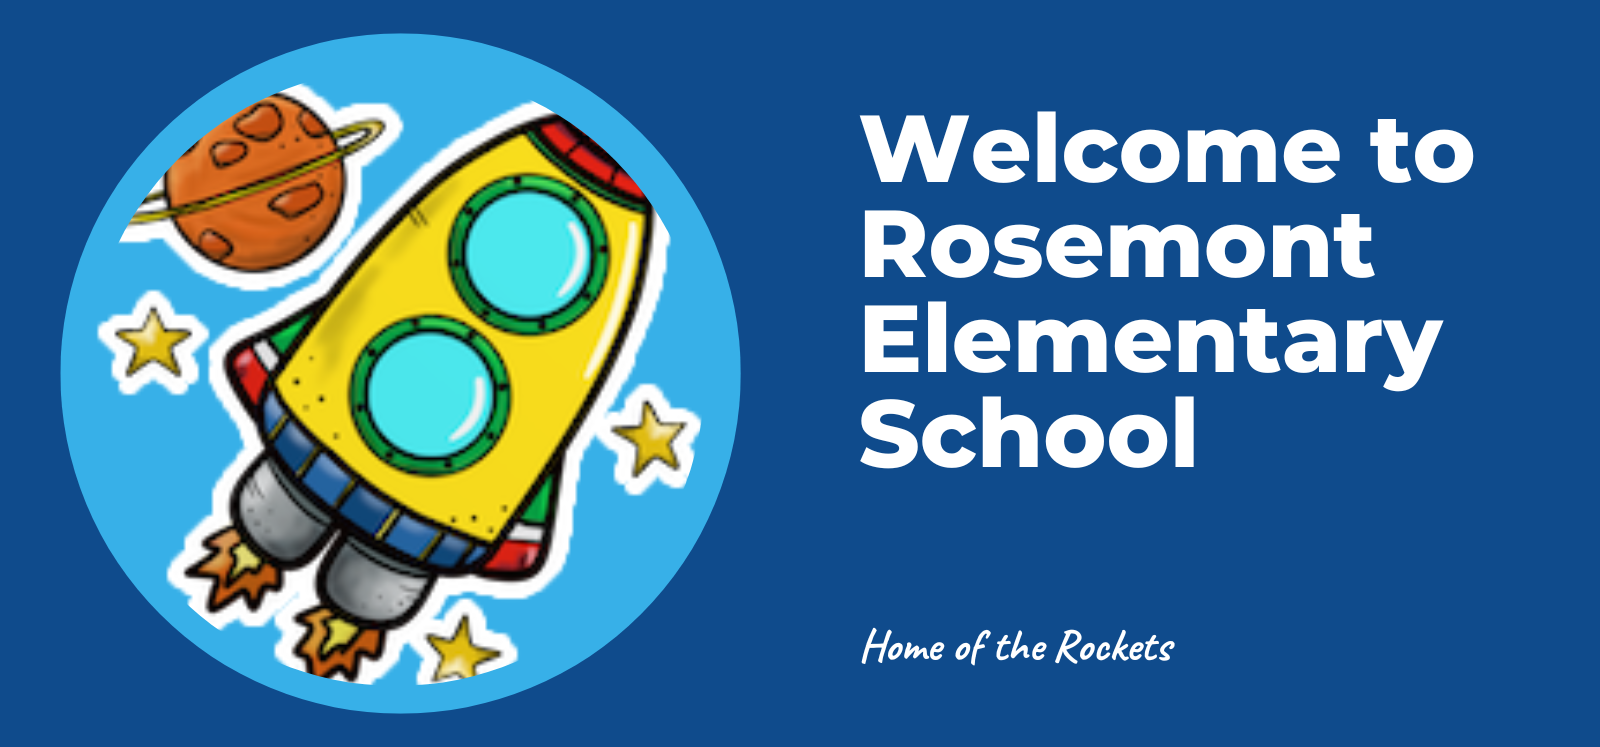 image of banner that says welcome to rosemont elementary school and home of the rockets